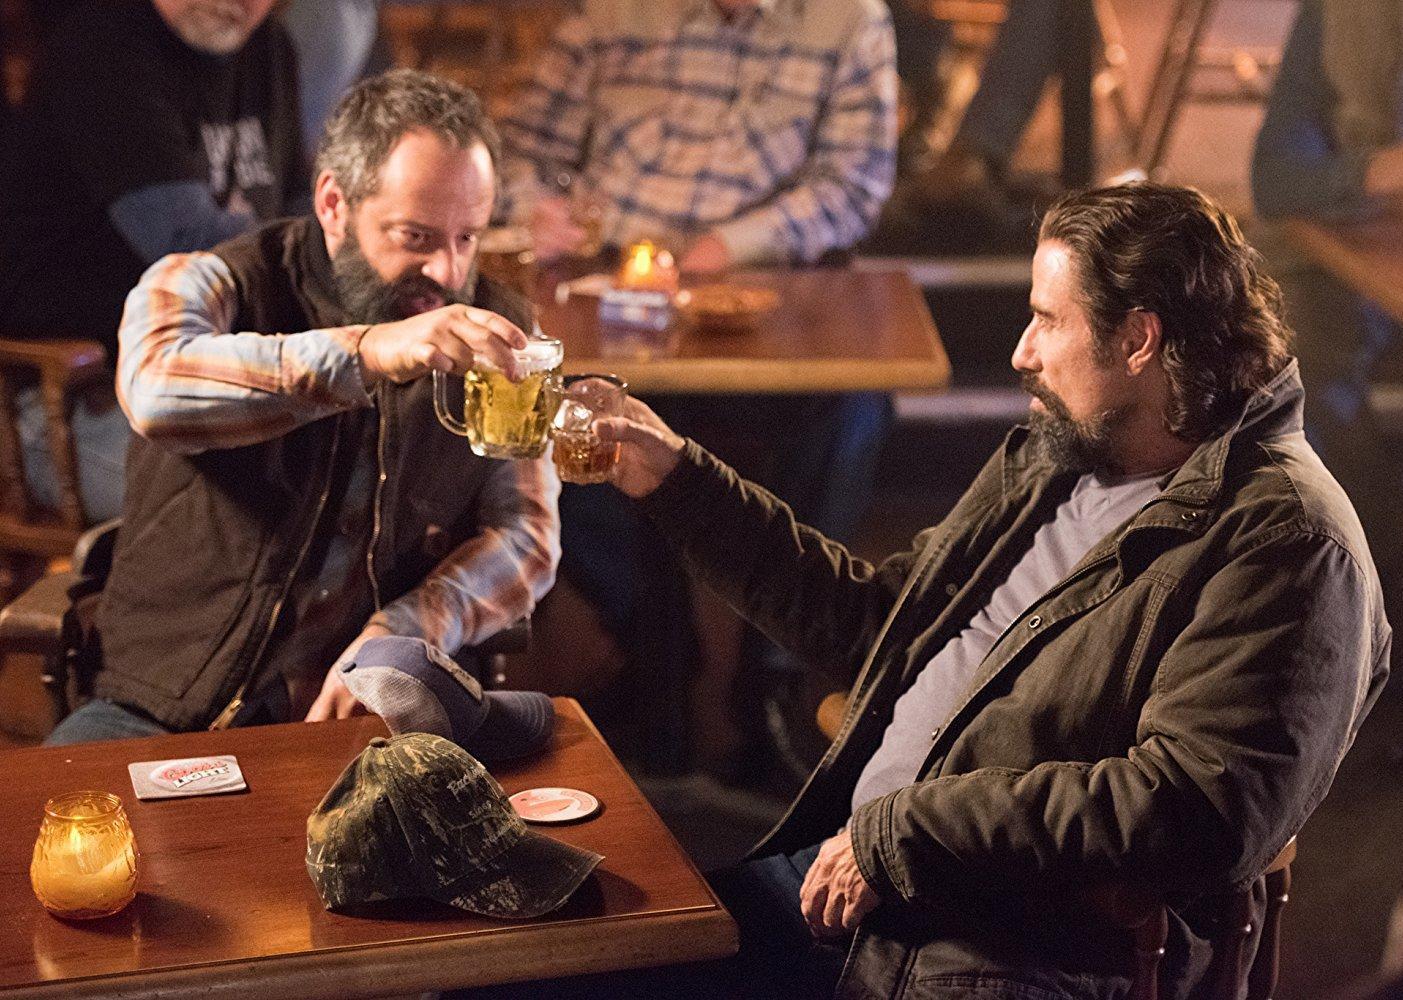 John Travolta and Gil Bellows at a tablein a bar cheersing with beers.